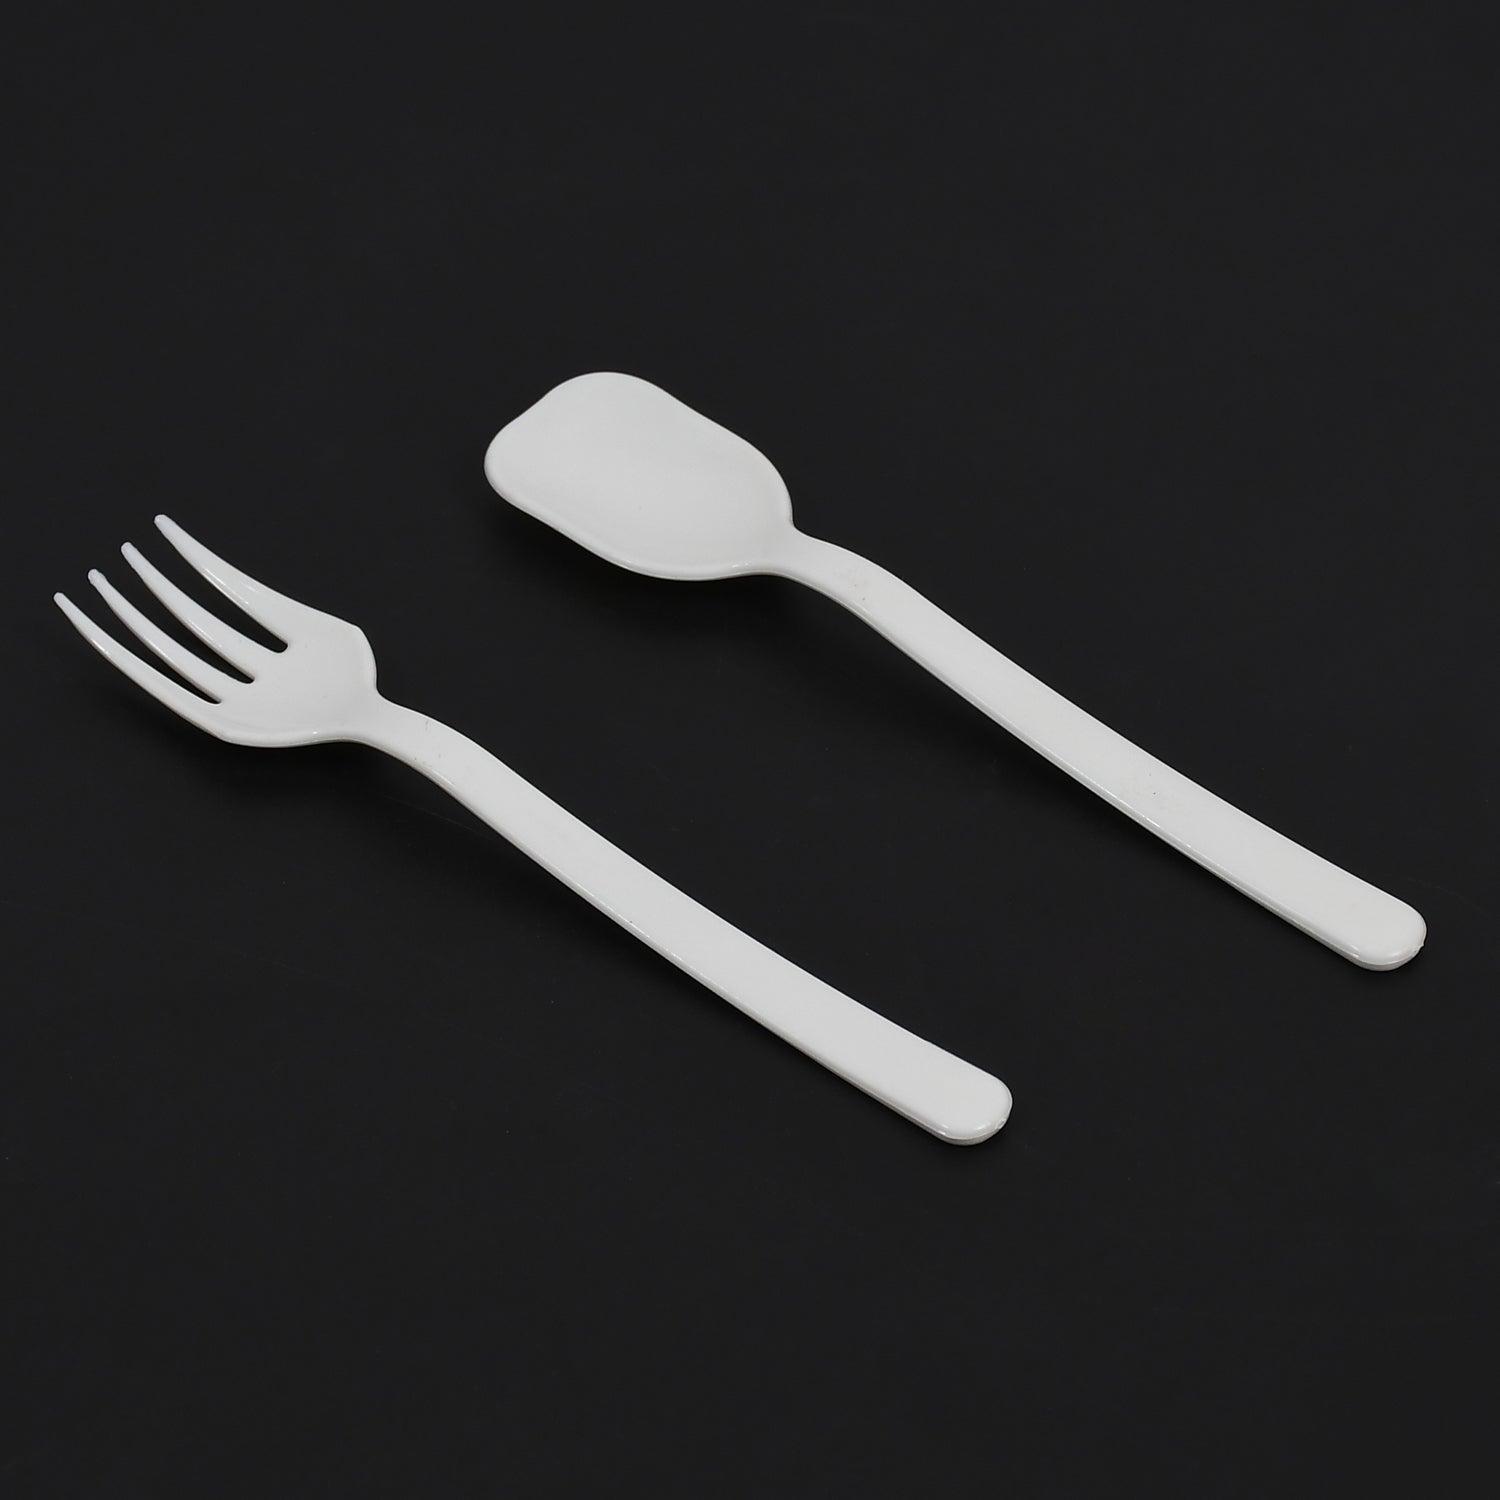 5239 Plastic Forks & spoon Cutlery-Utensils, Parties, Dinners, Catering Services, Family Gatherings ( pack of 2) DeoDap